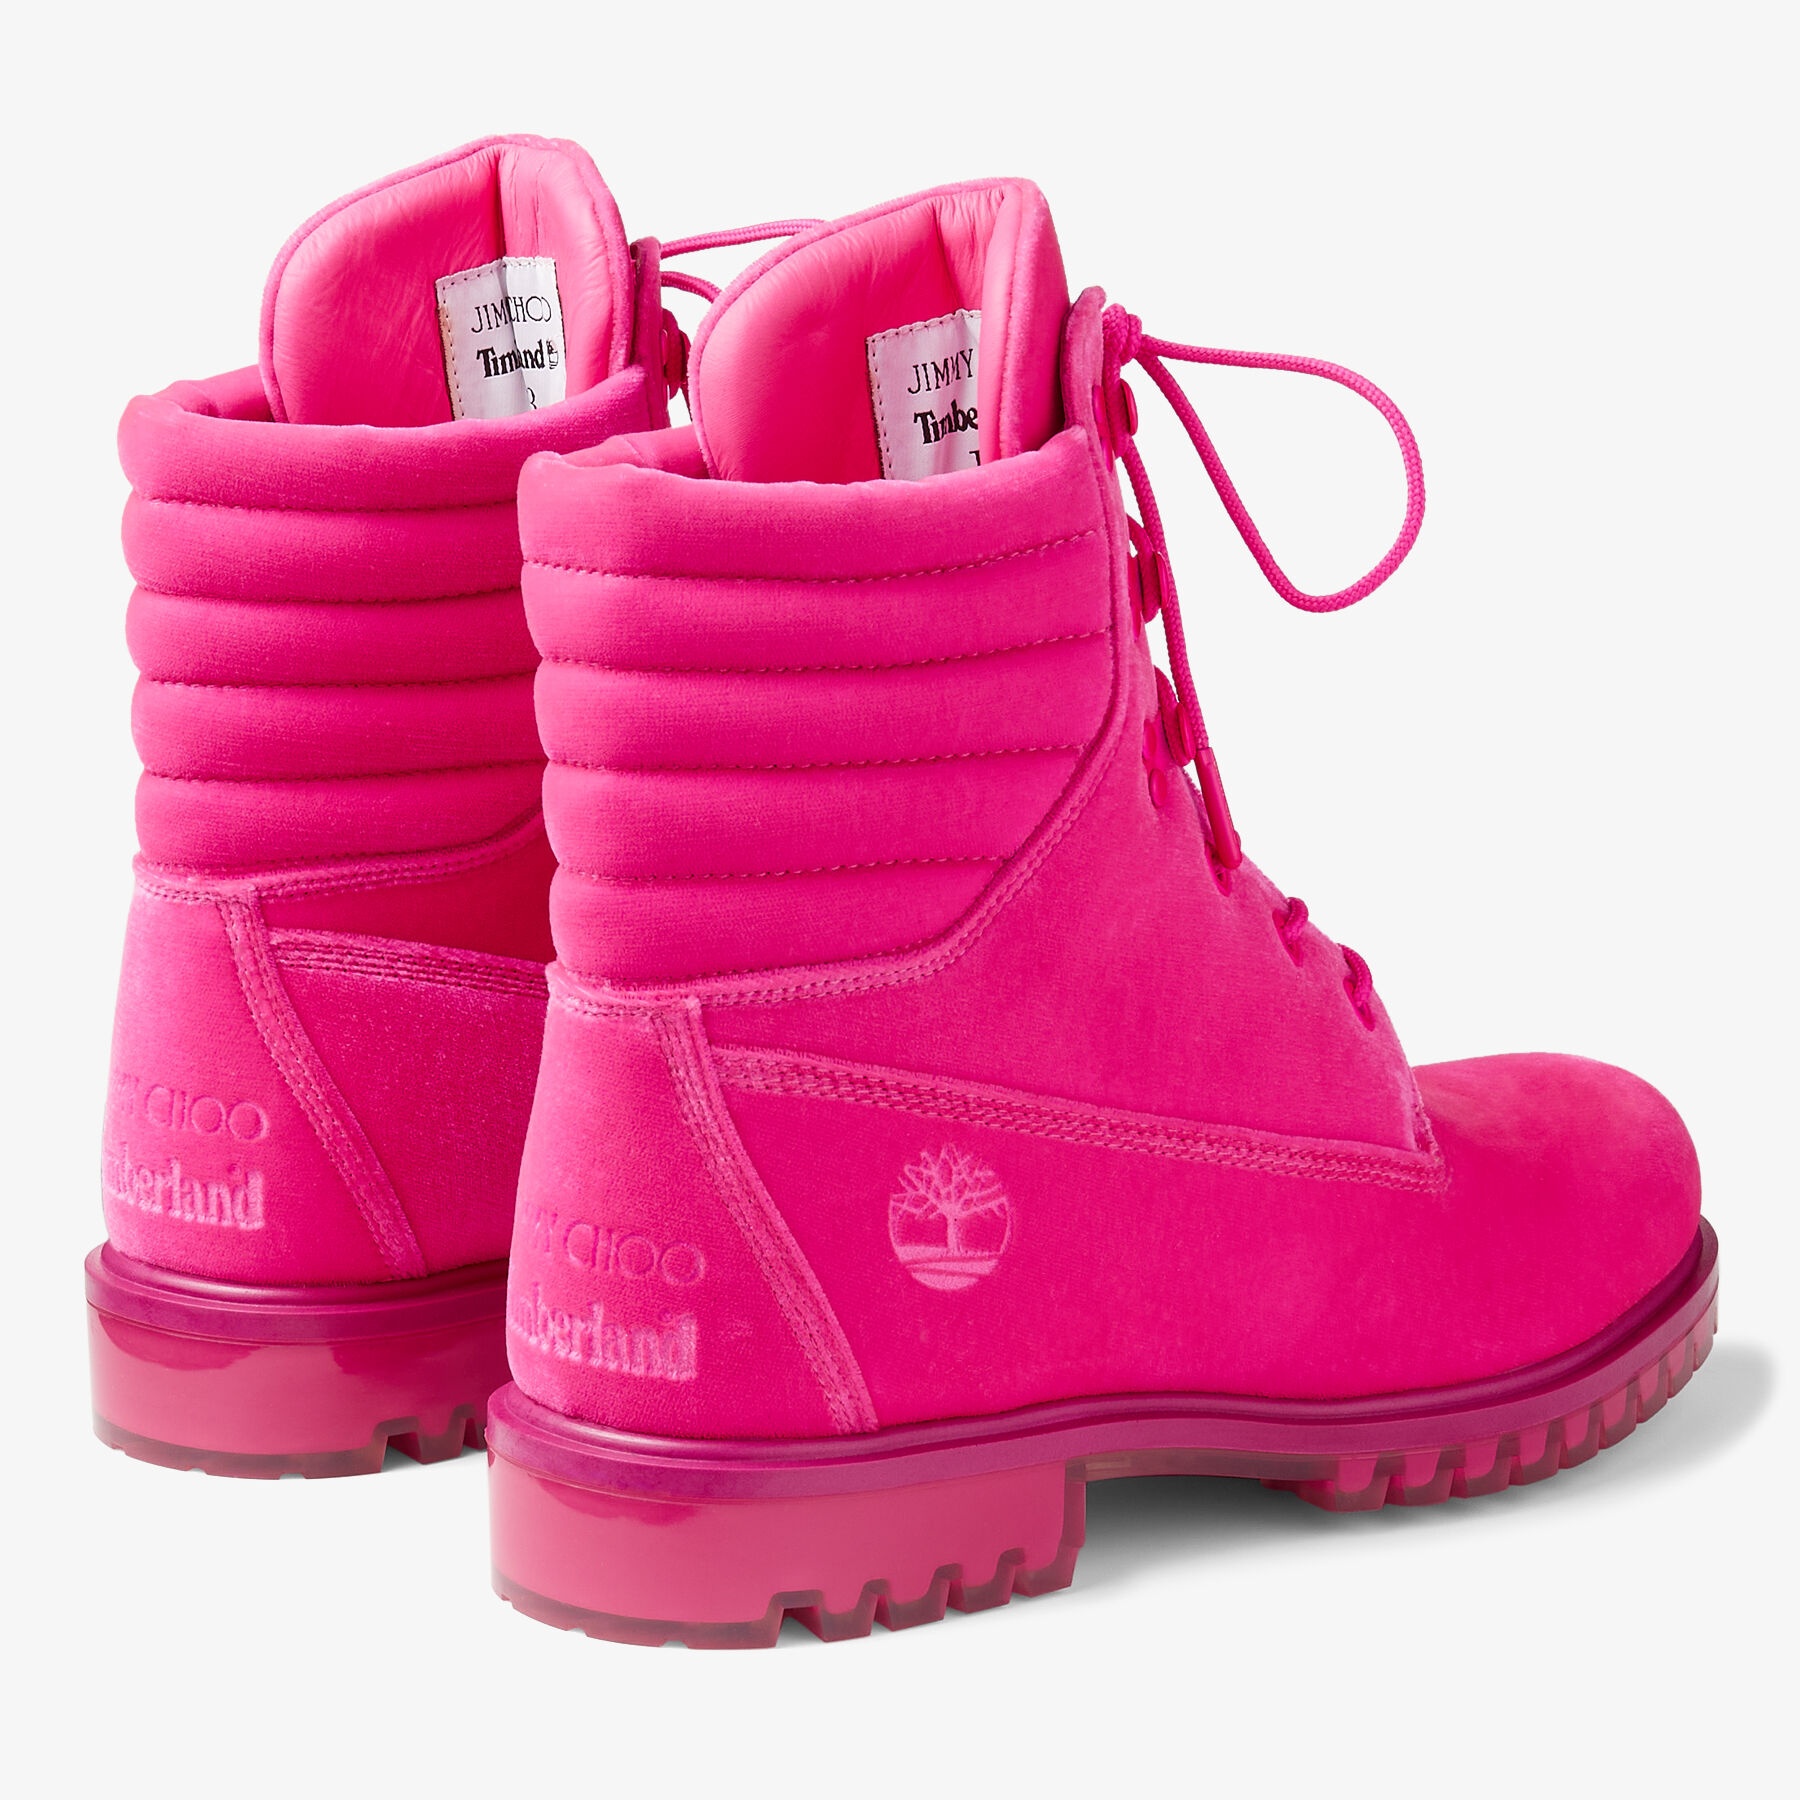 JIMMY CHOO X TIMBERLAND 8 INCH PUFFER BOOT
Hot Pink Timberland Velvet Ankle Boots - 4